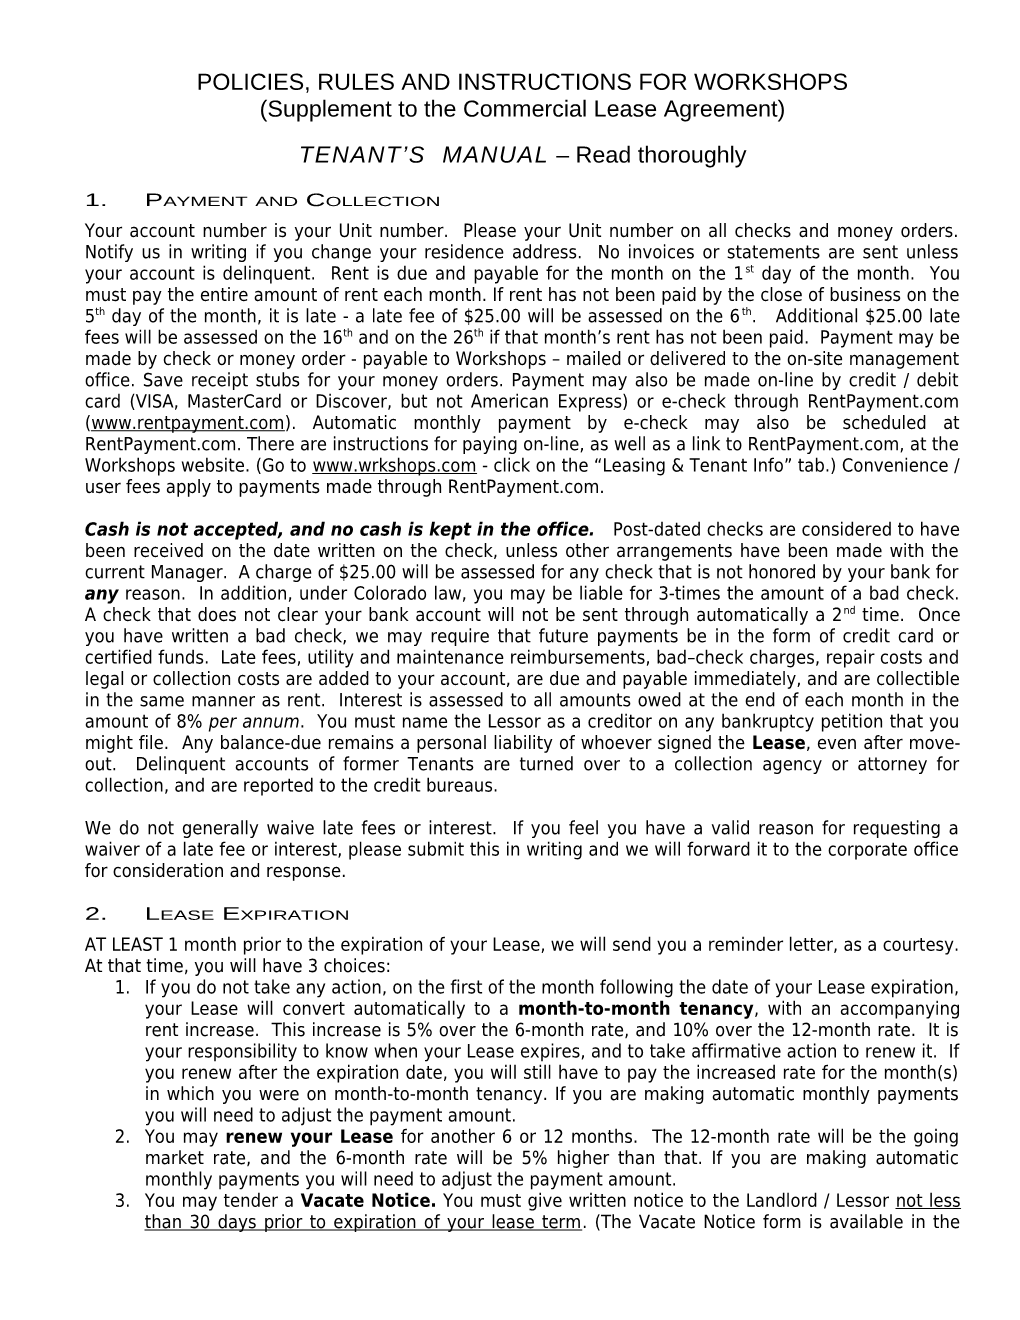 Policies and Rules of the Facility